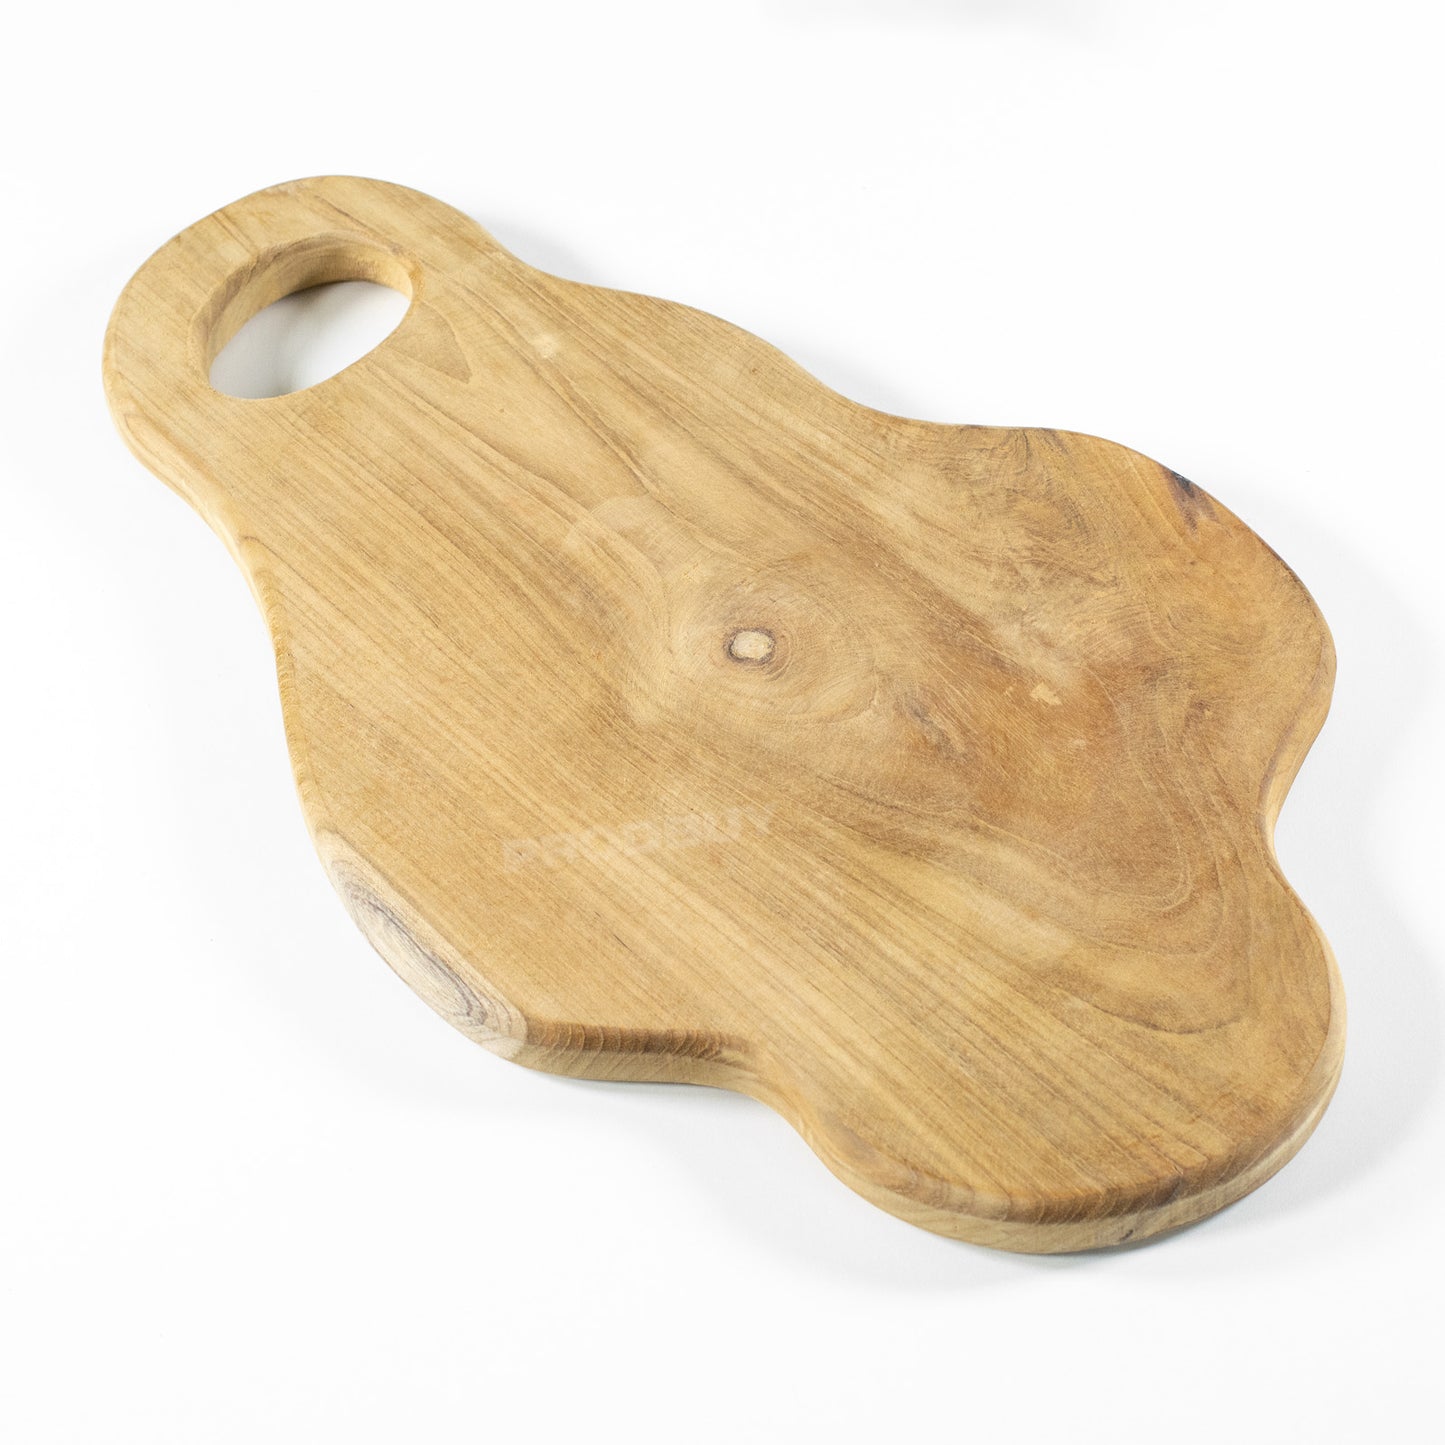 Rustic Teak Root Wood Chopping Board 46x27cm Hand Carved Rustic Serving Tray